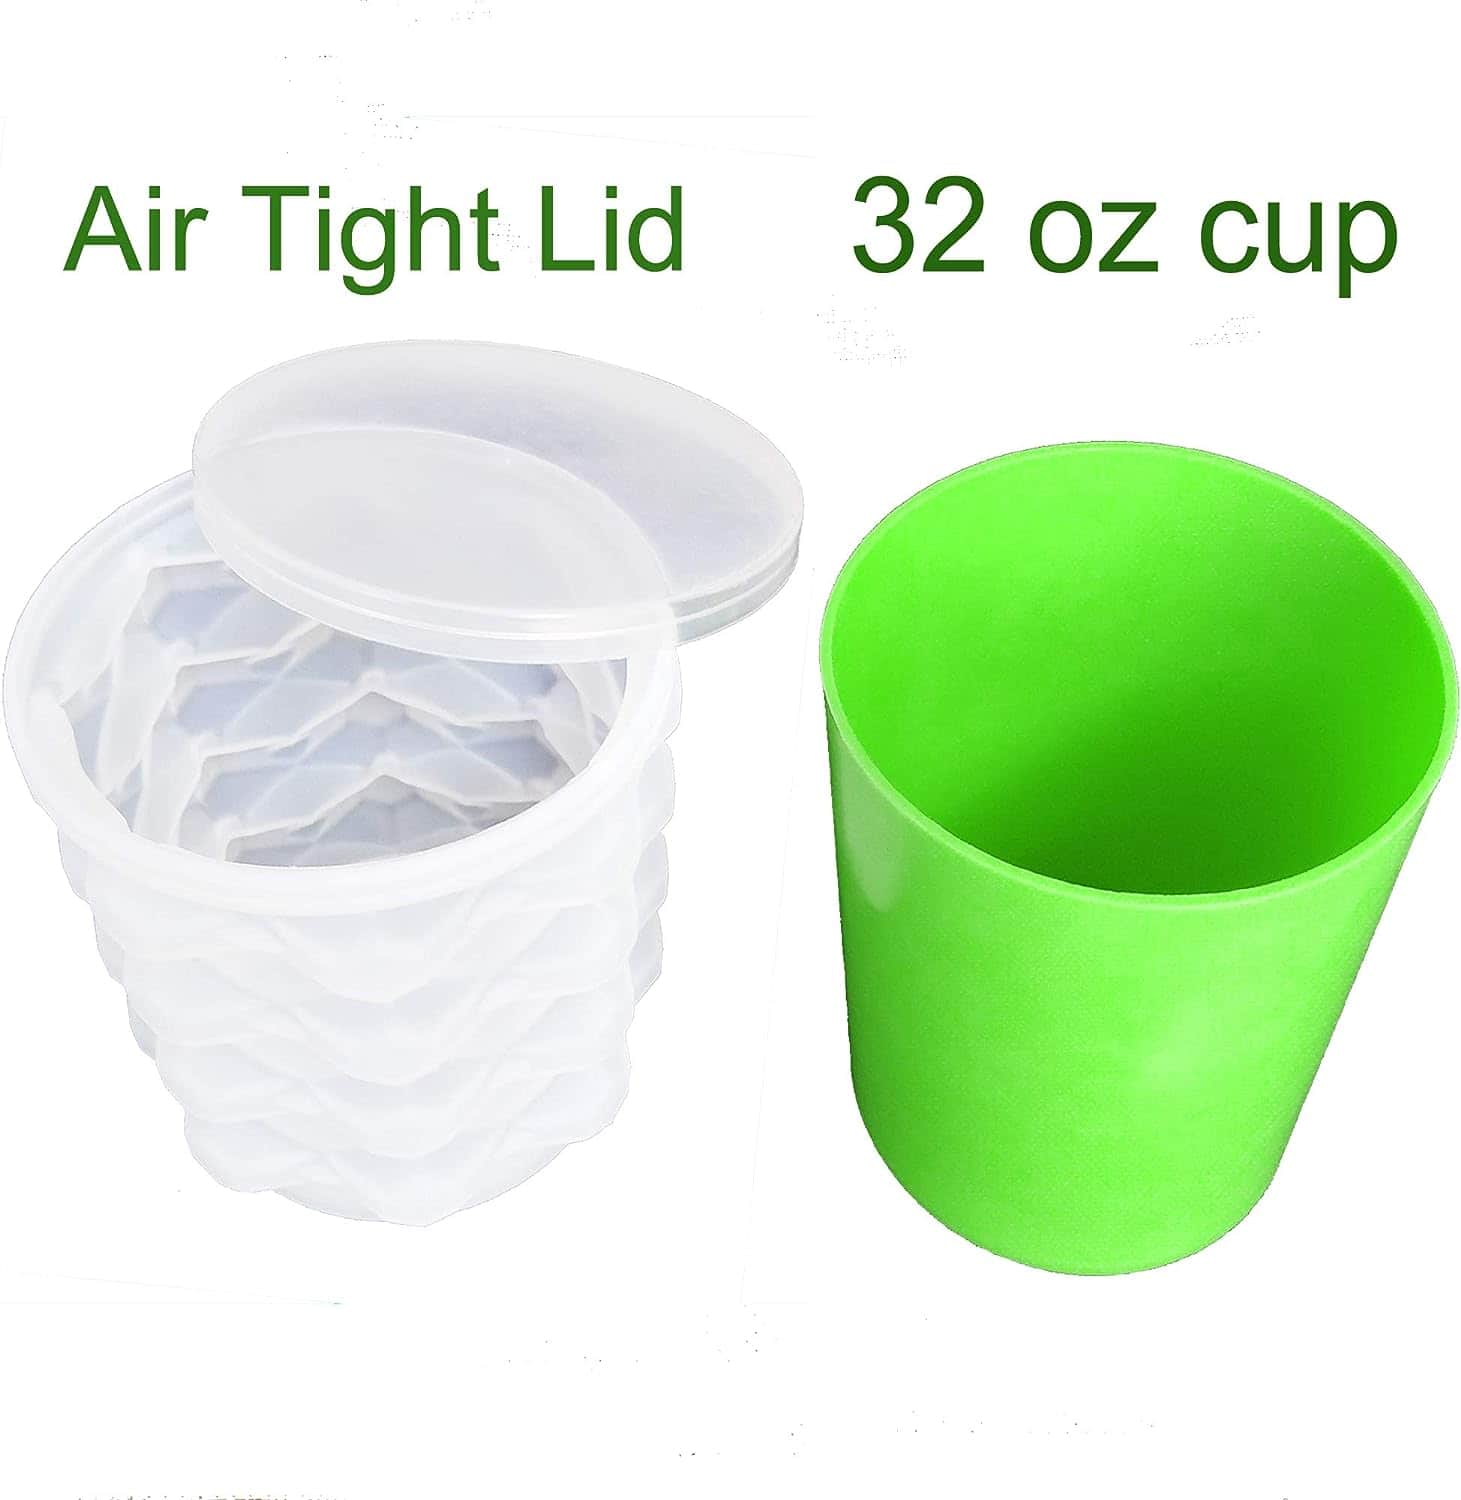 New Ice Cube Maker Silicone Bucket Mold Cooler With Lid Indoors Outdoors Use Makes Small Nugget Ice Chips for Soft Drinks Beverage Wine Beer Whiskey Cocktail Safe Healthy BPA Free Ice Tray Cylinder 5